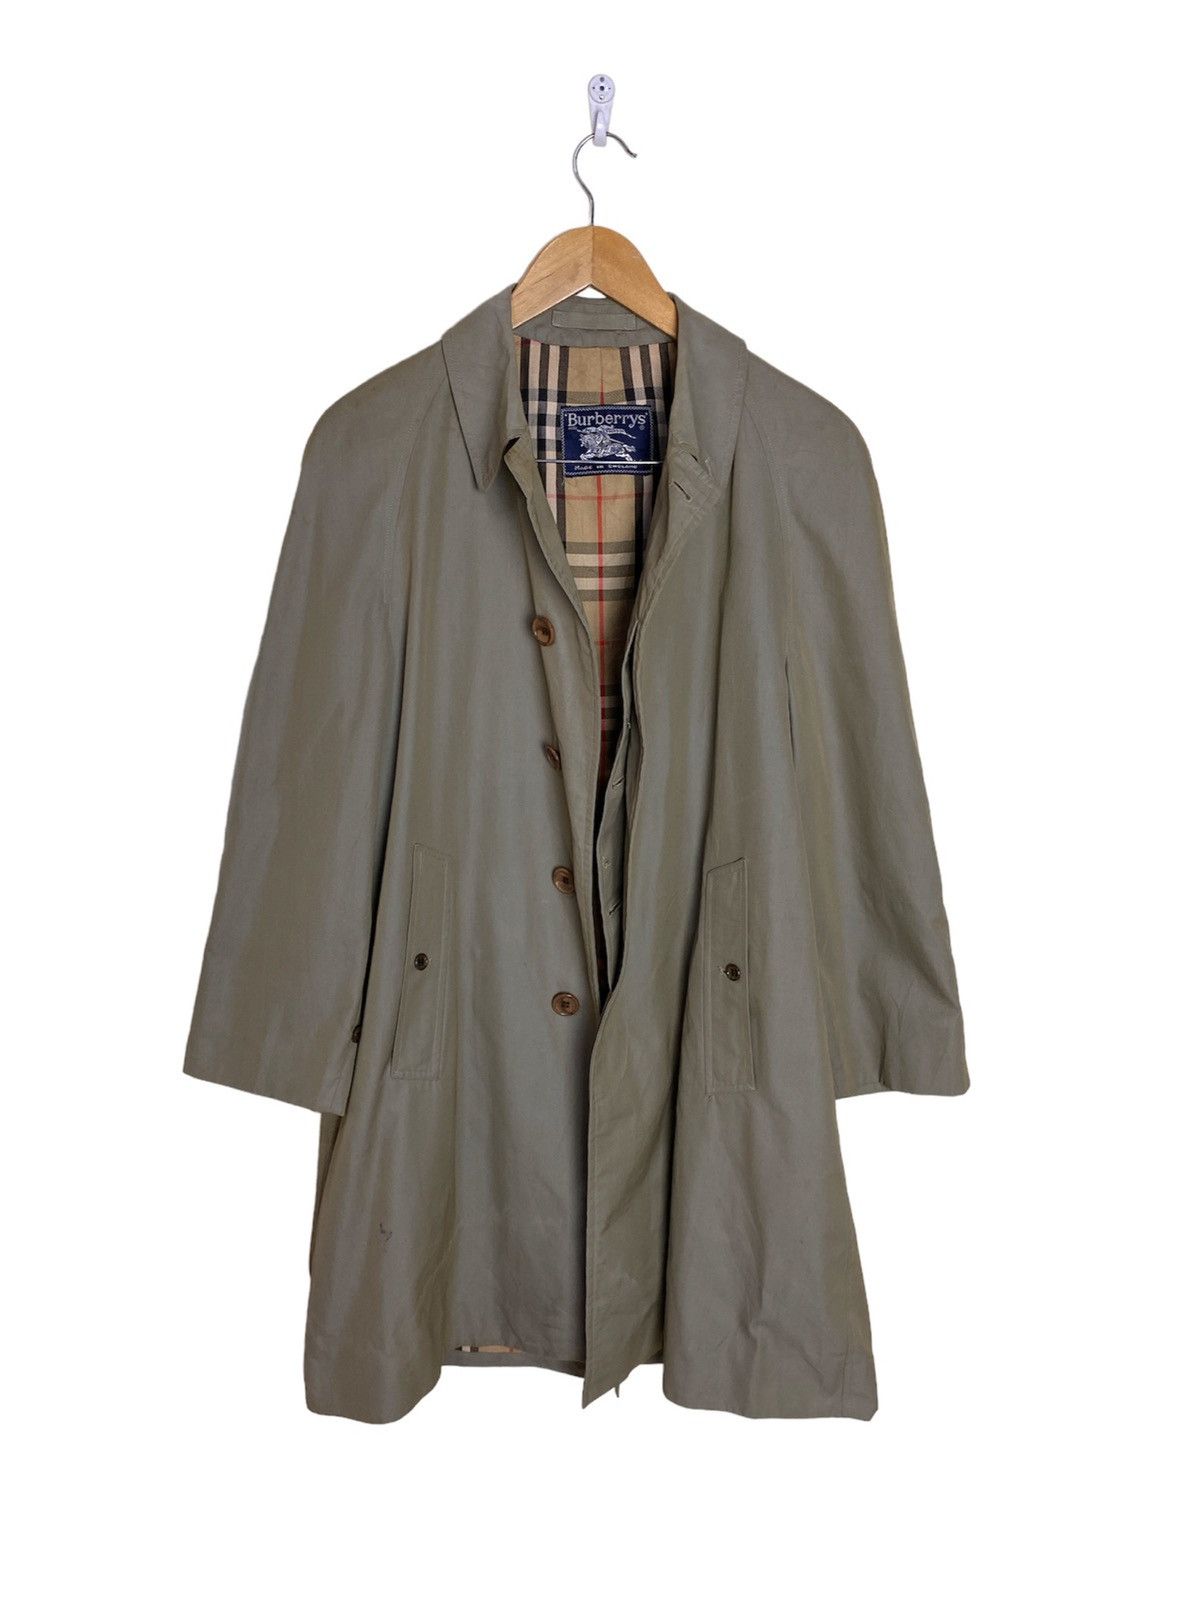 Burberry Prorsum - Vintage Burberry Trench Coat Jacket Made in England - 2